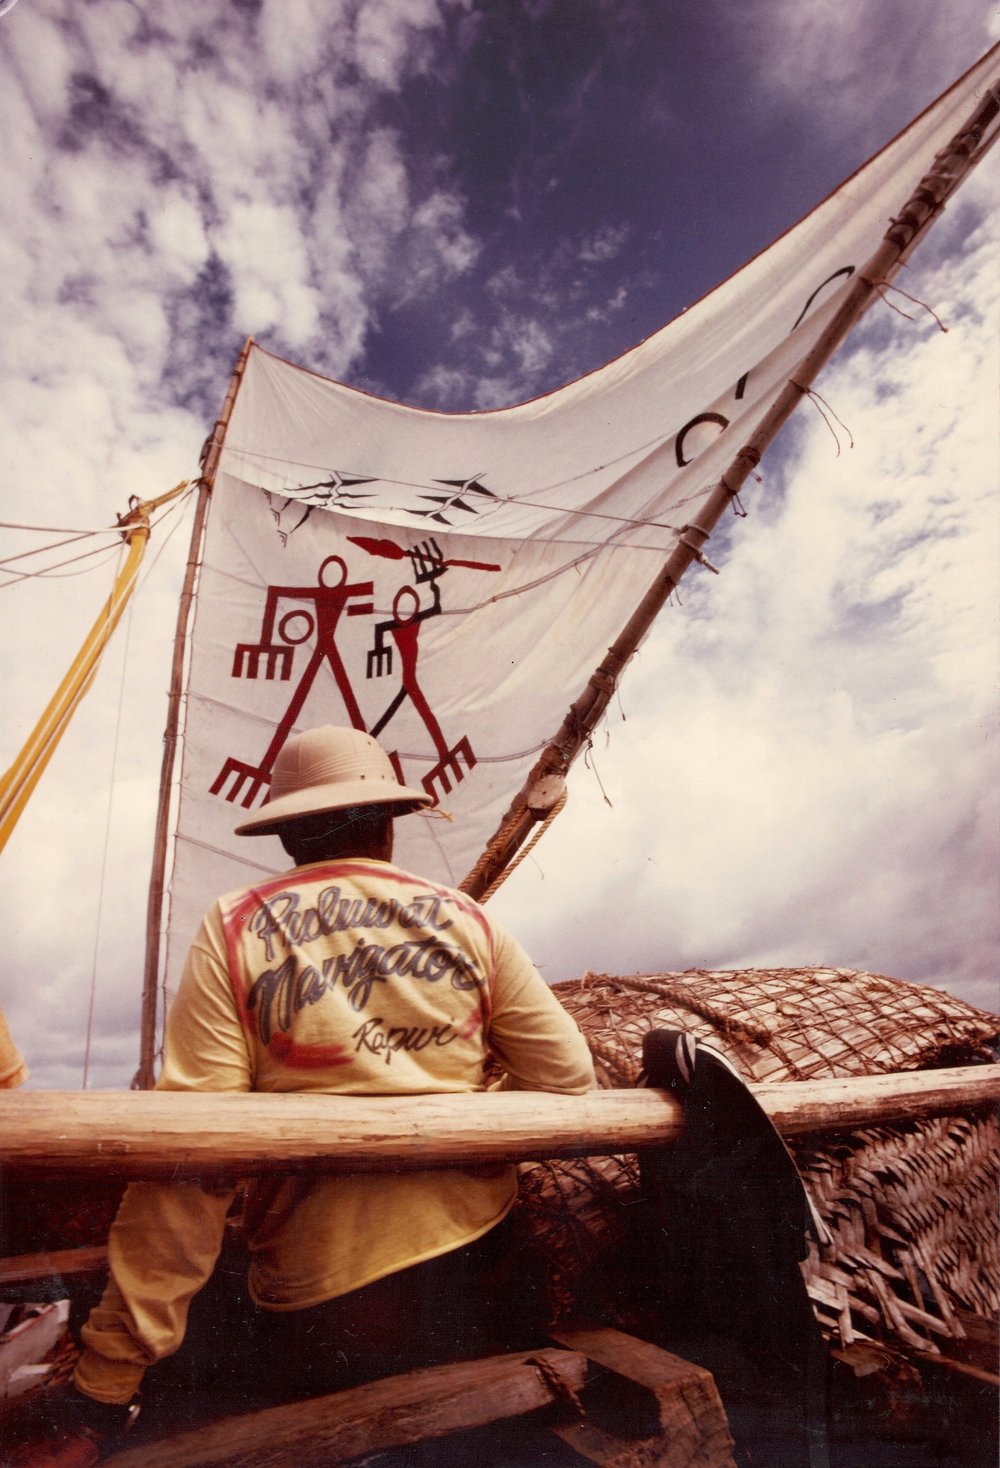  During the Polowat to Guam leg of Voyage ‘87, Master Navigator Rapwi Yaluwairh guides the sailing canoe, ‘Video.’ The design on Video’s sail is based on a petroglyph from Gadao’s Cave, Guahan. Photo by Rob Limtiaco © 